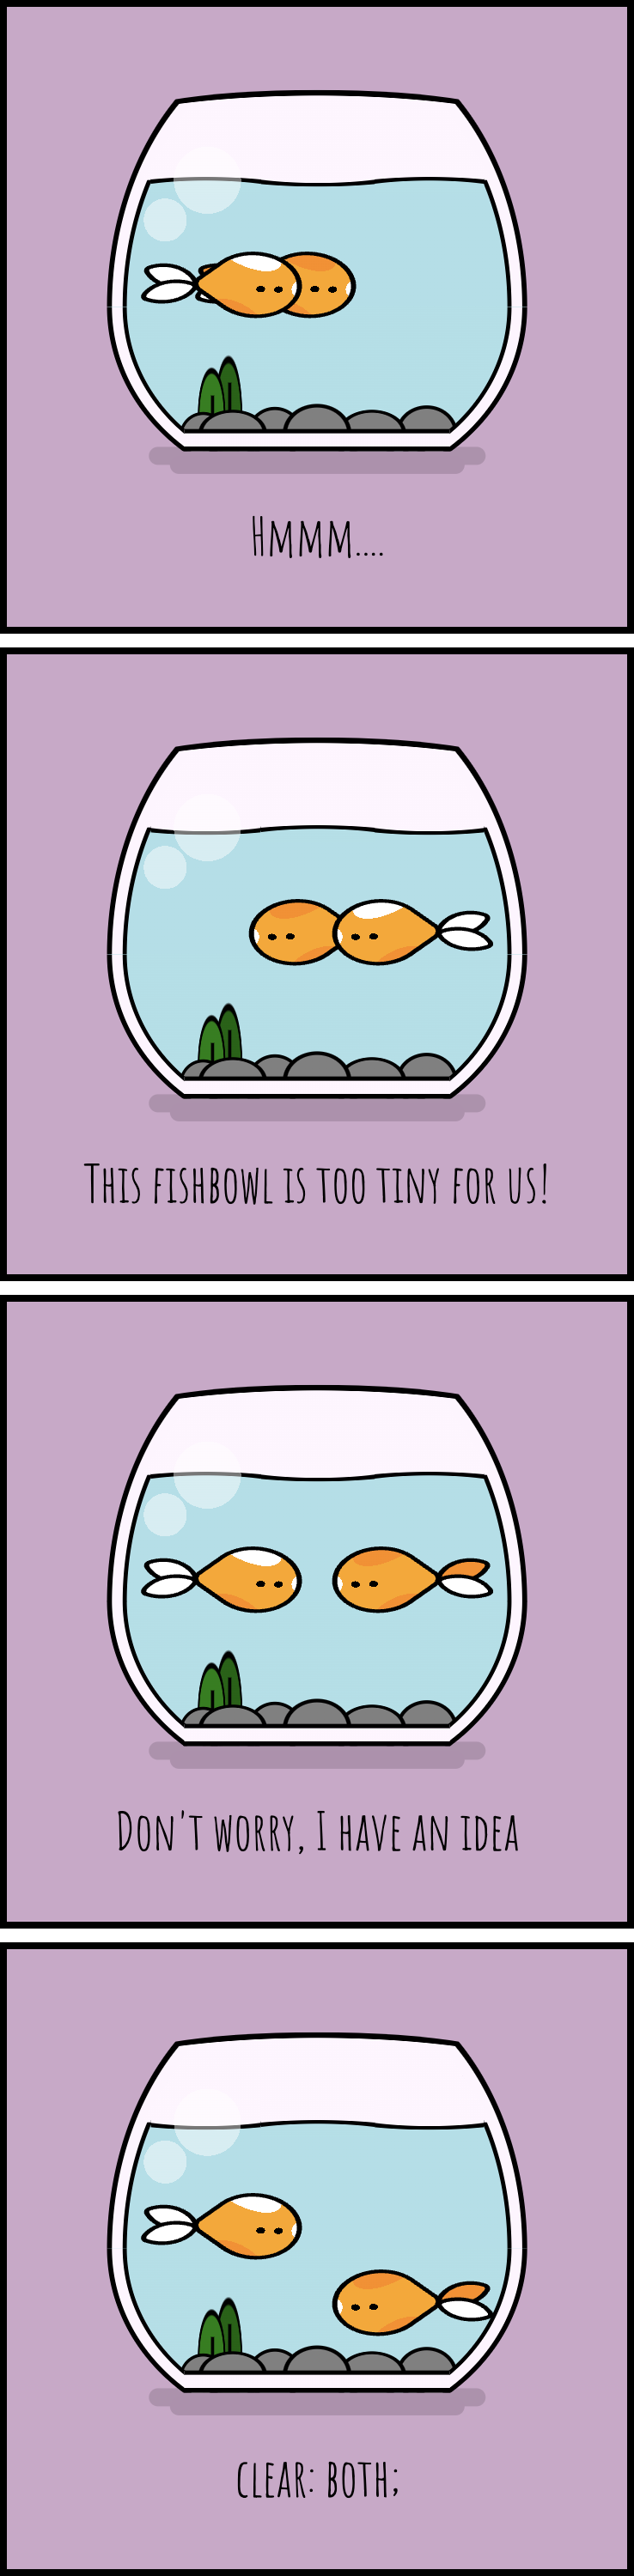 Cartoon with 4 panels showing two fish swimming at the same level. One complains that the fishbowl is too small for both of them. The other one replies that it has a solution: clear:both! And now they are at different levels.